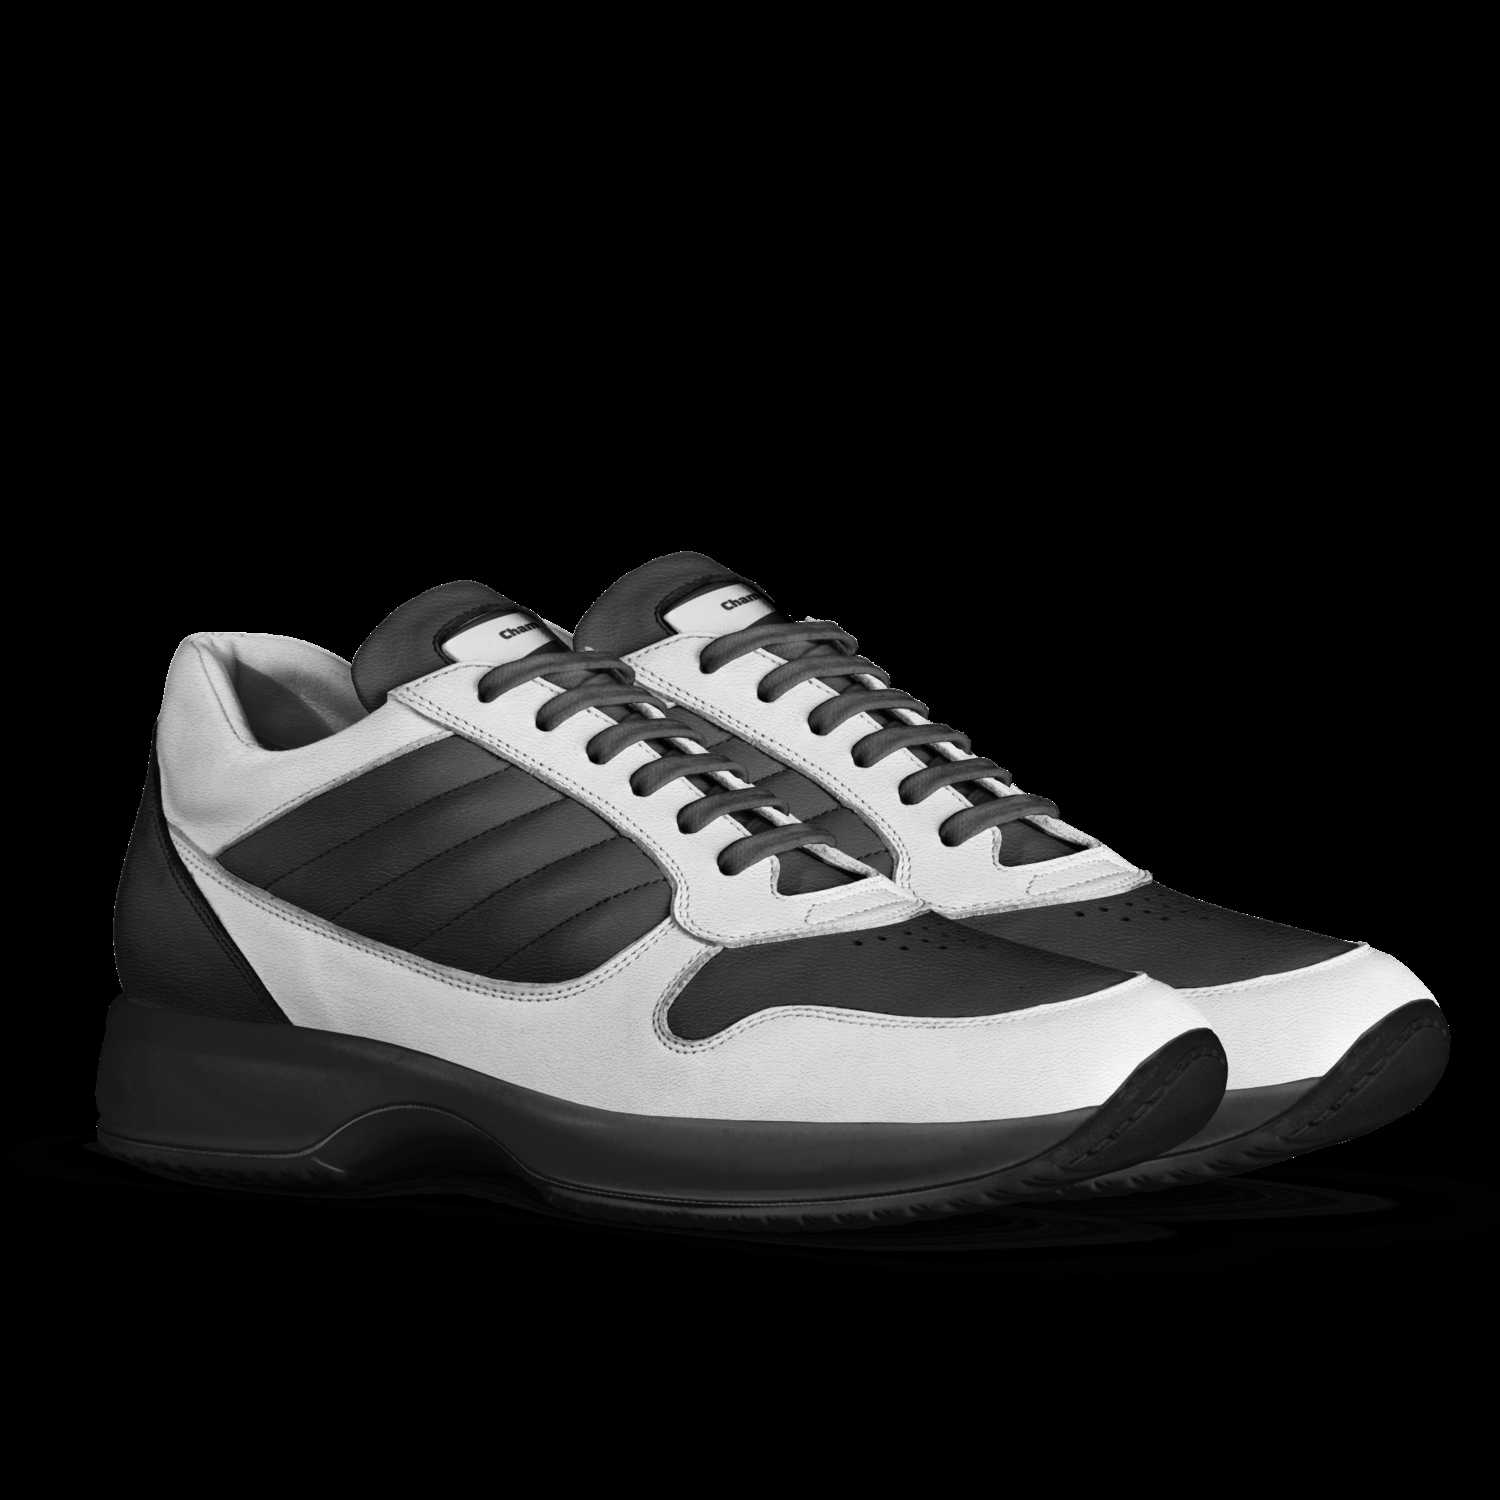 A Custom Shoe concept by Riley Taylor